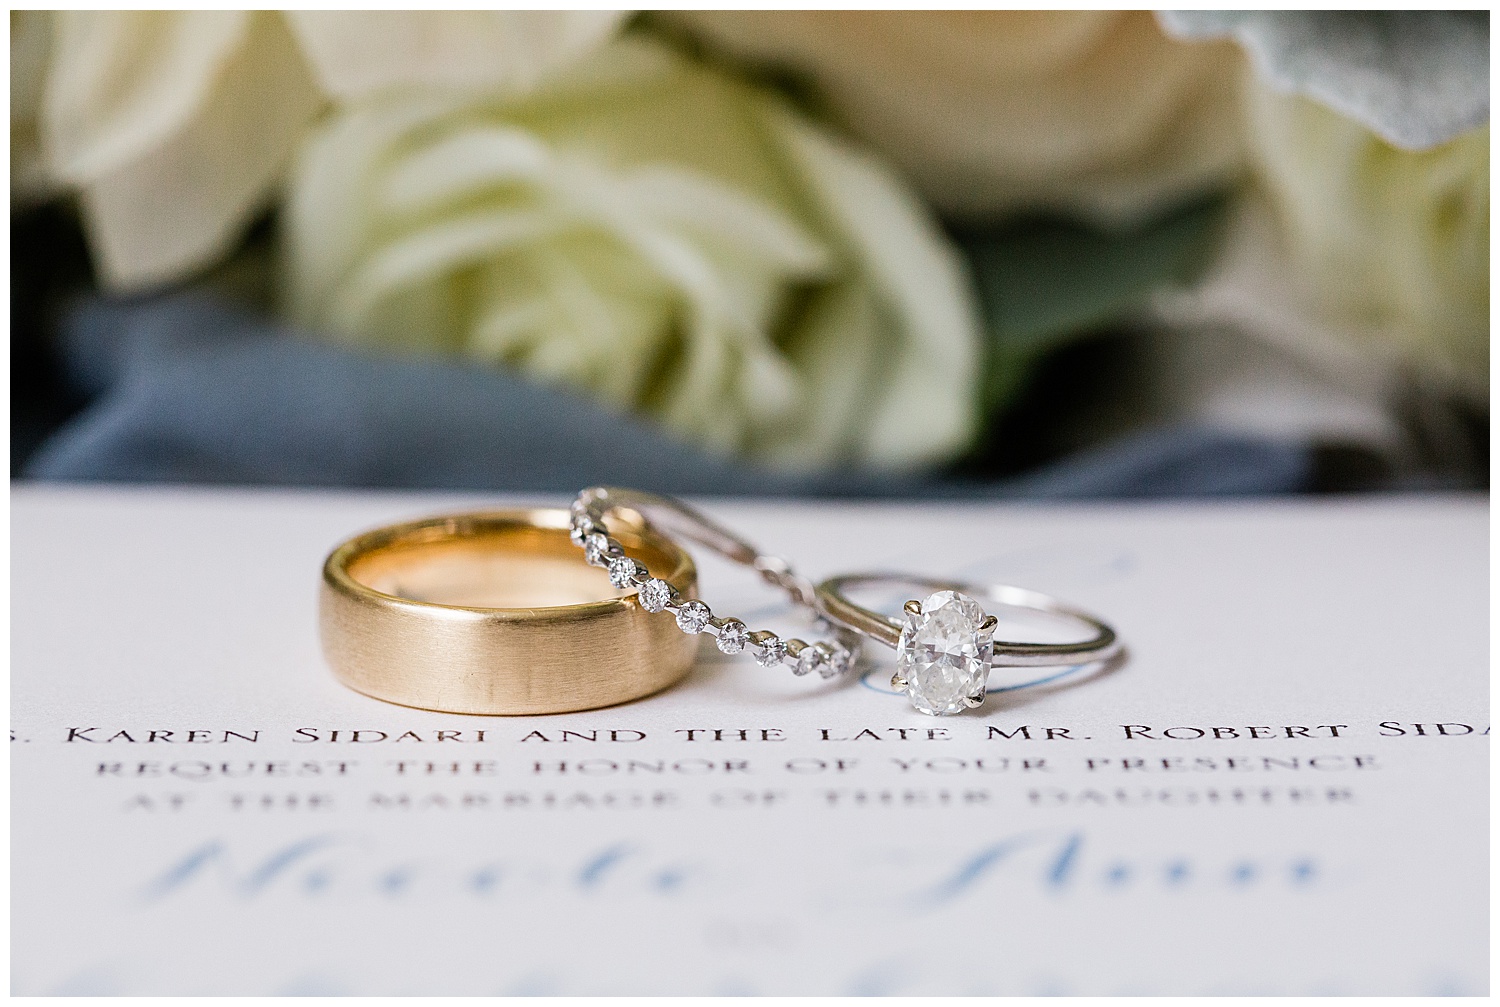 gold wedding band and wedding rings on white invitations